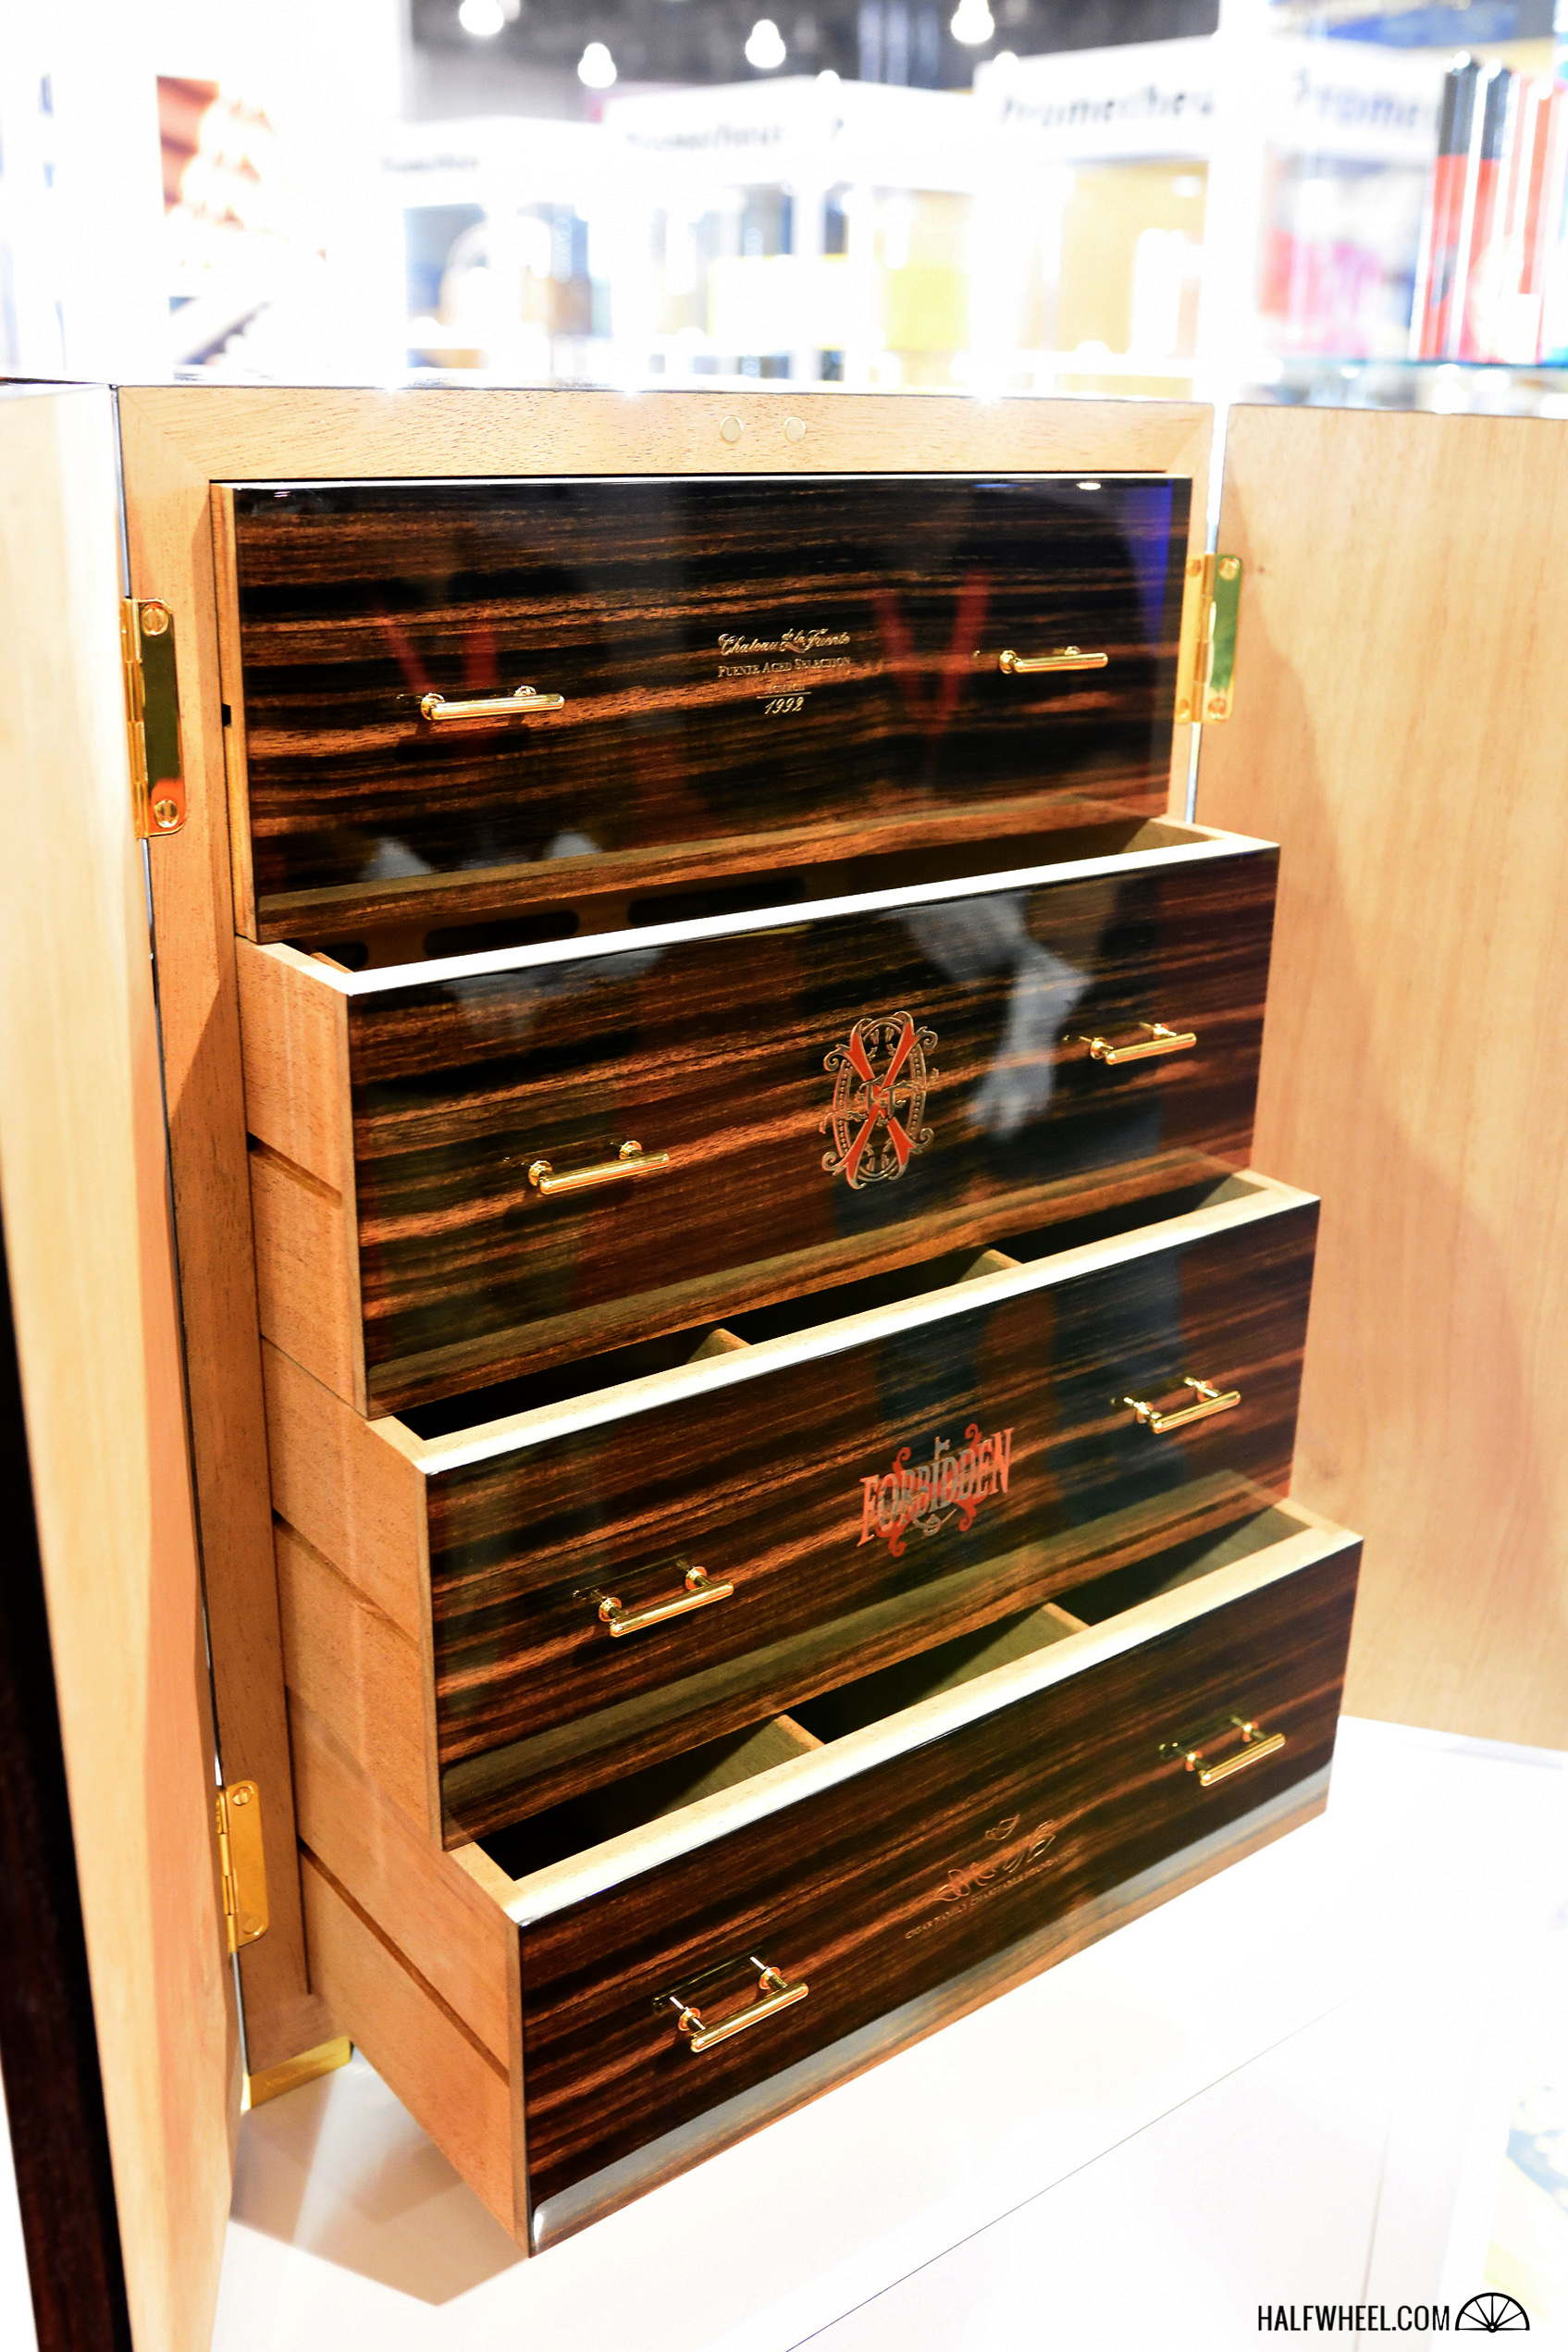 Prometheus 2016 Limited Edition Fuente Fuente Opus X Story Humidor 5 IPCPR 2016